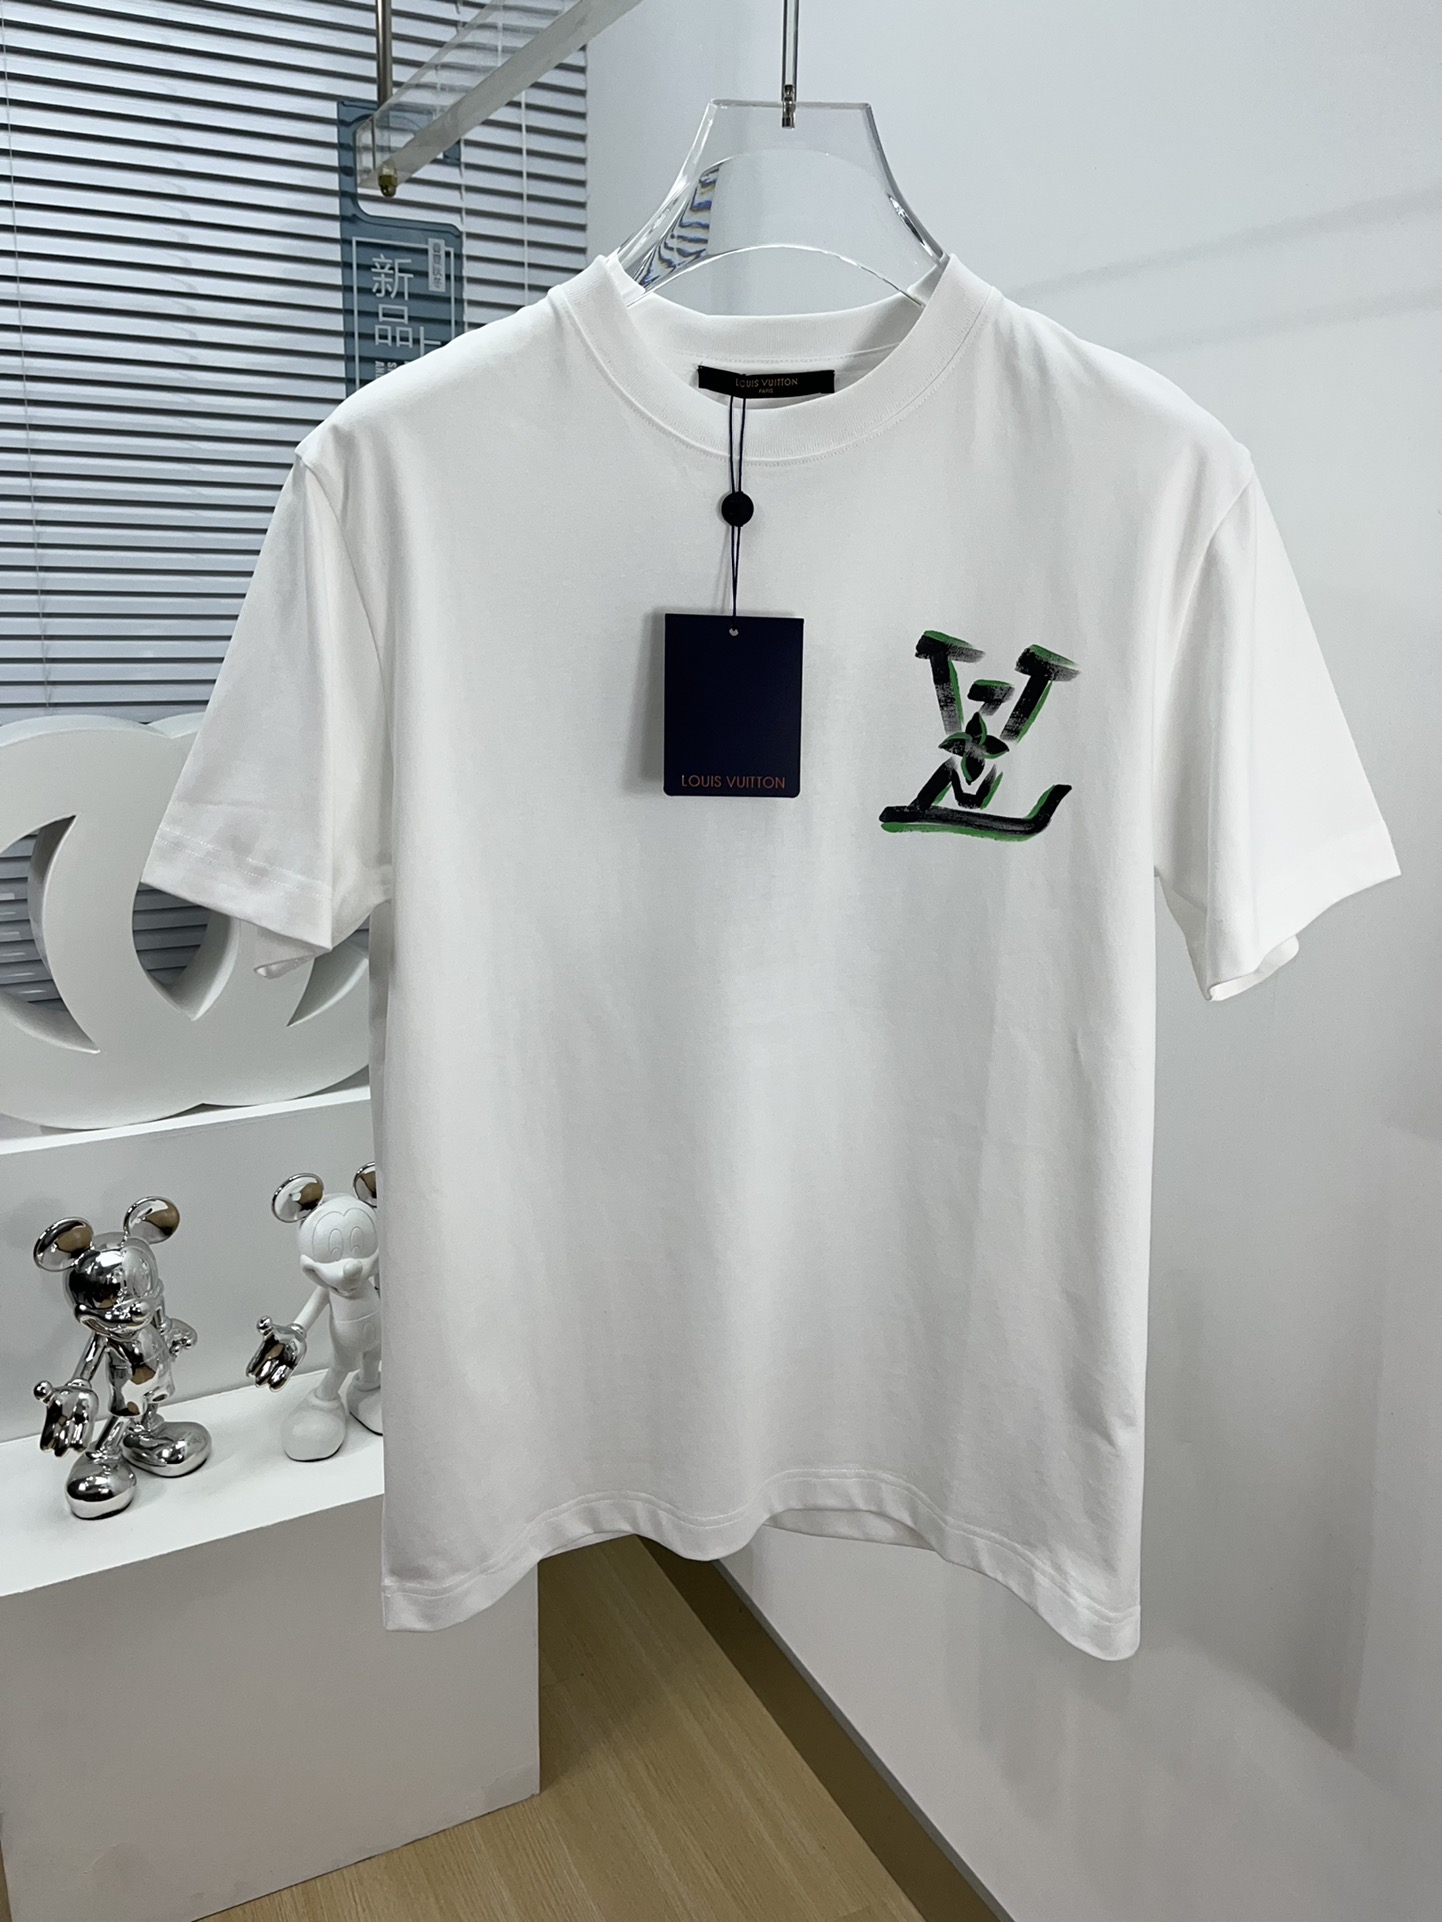 Louis Vuitton Clothing T-Shirt Black White Printing Cotton Spring/Summer Collection Fashion Short Sleeve